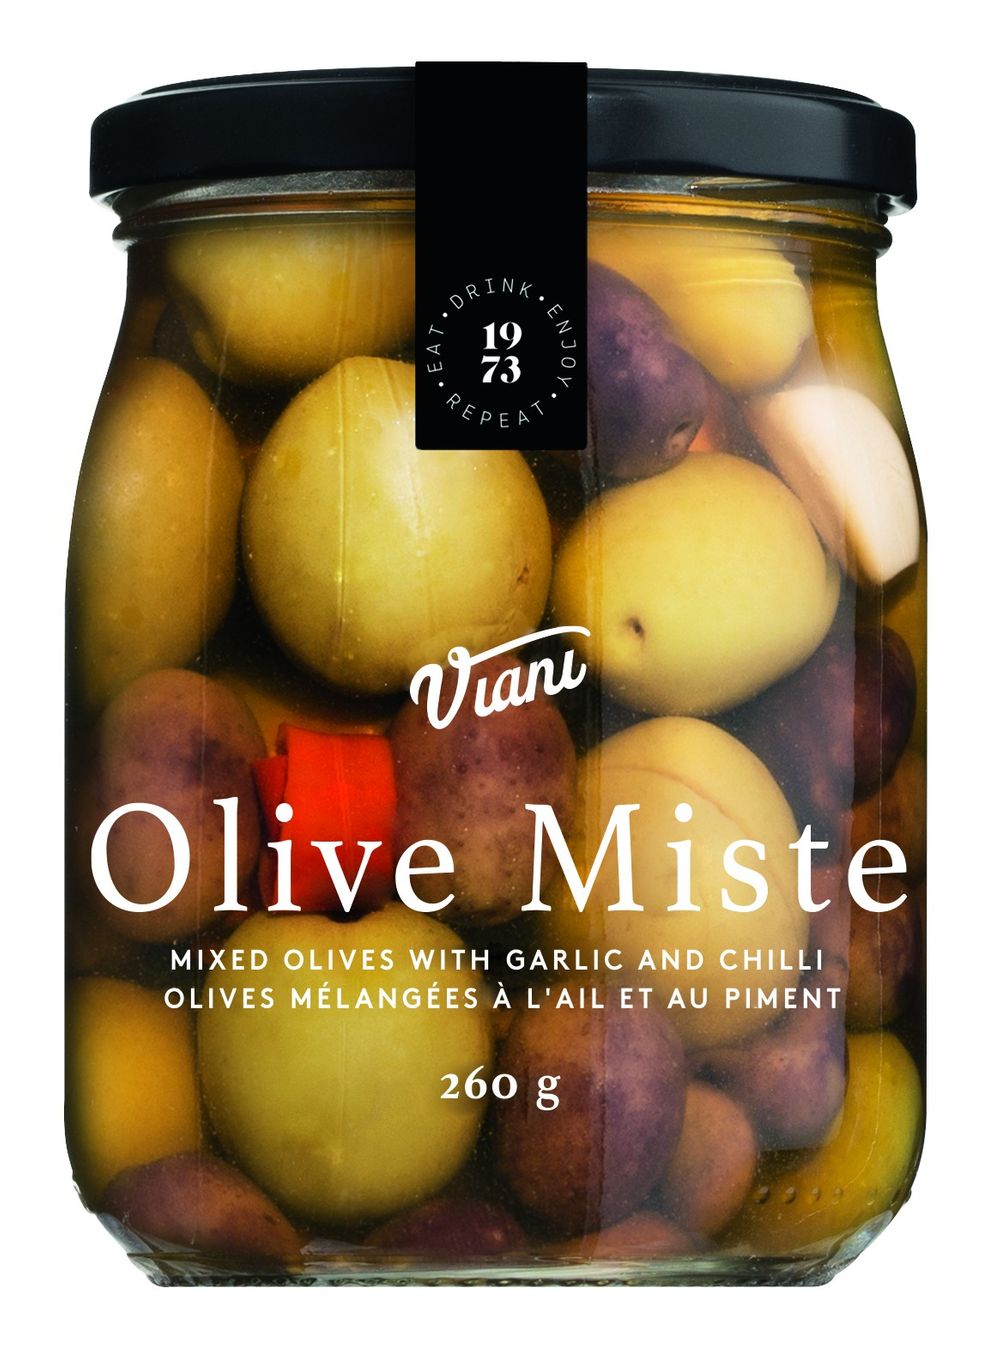 Mixed Olives with Garlic and Chilli